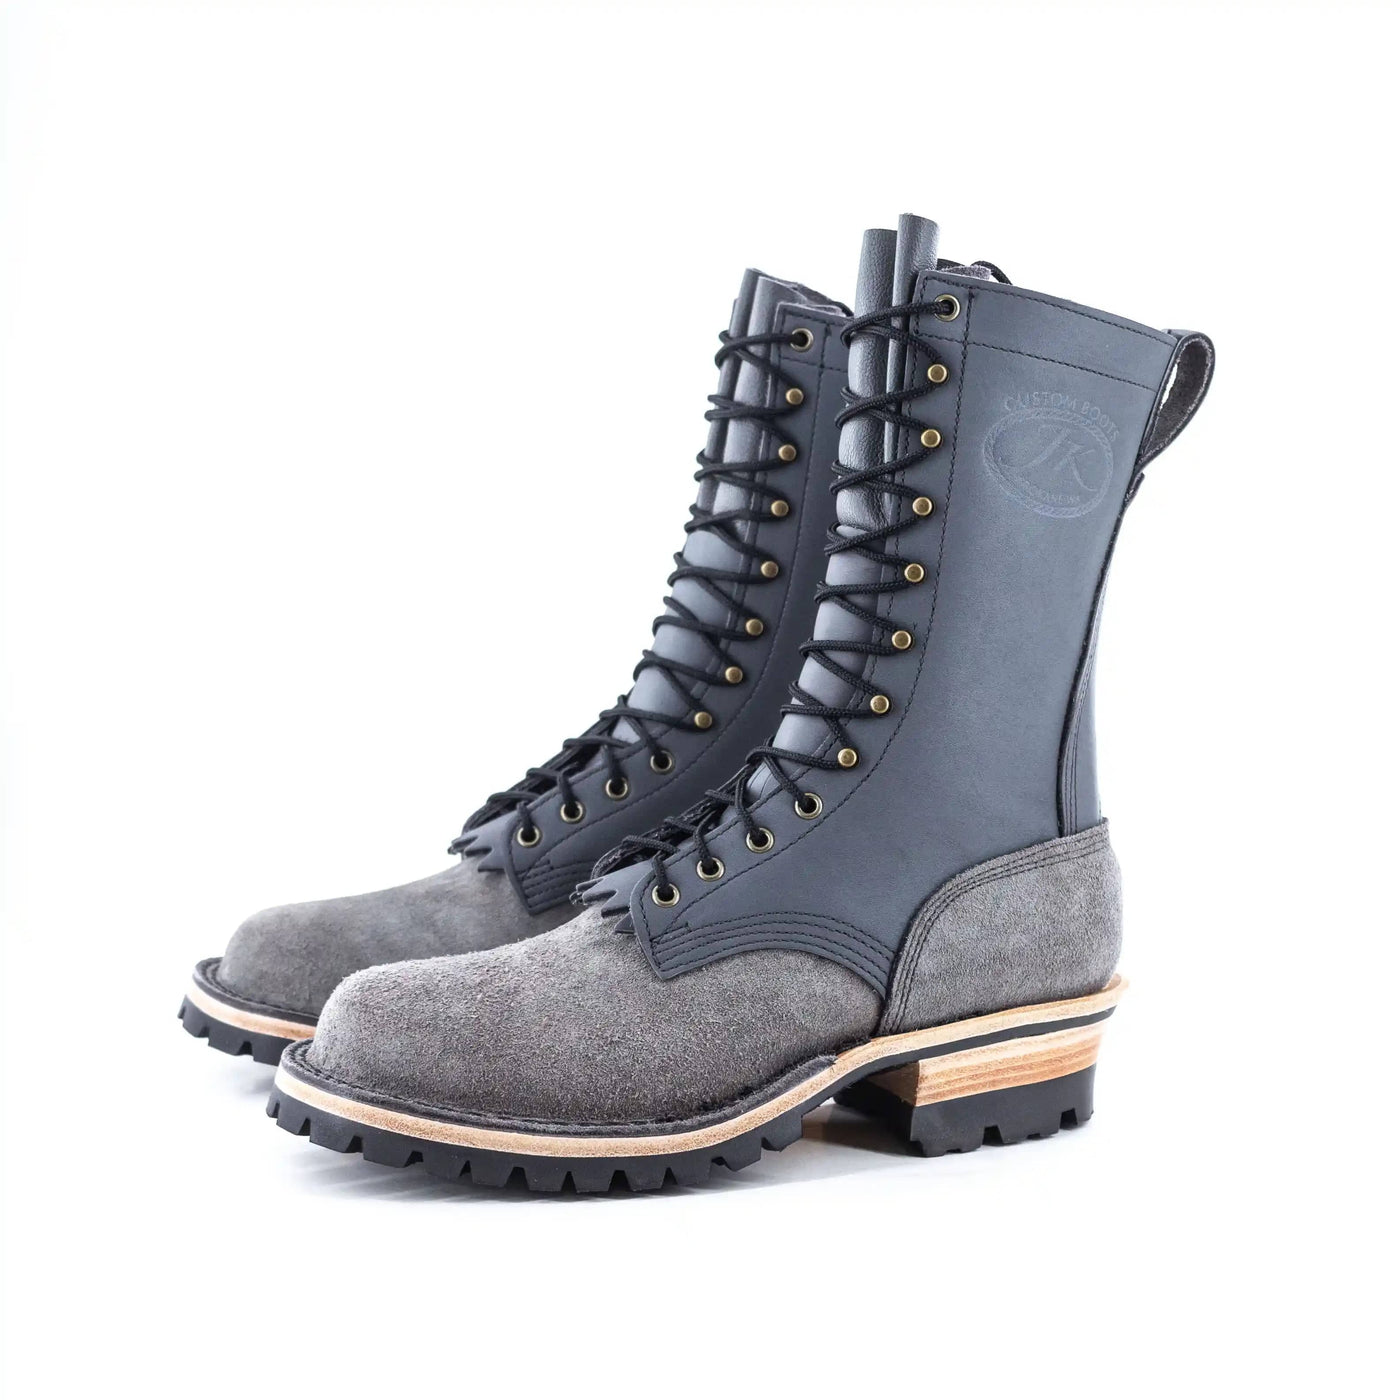 the superduty work boot from jk boots in gray 02